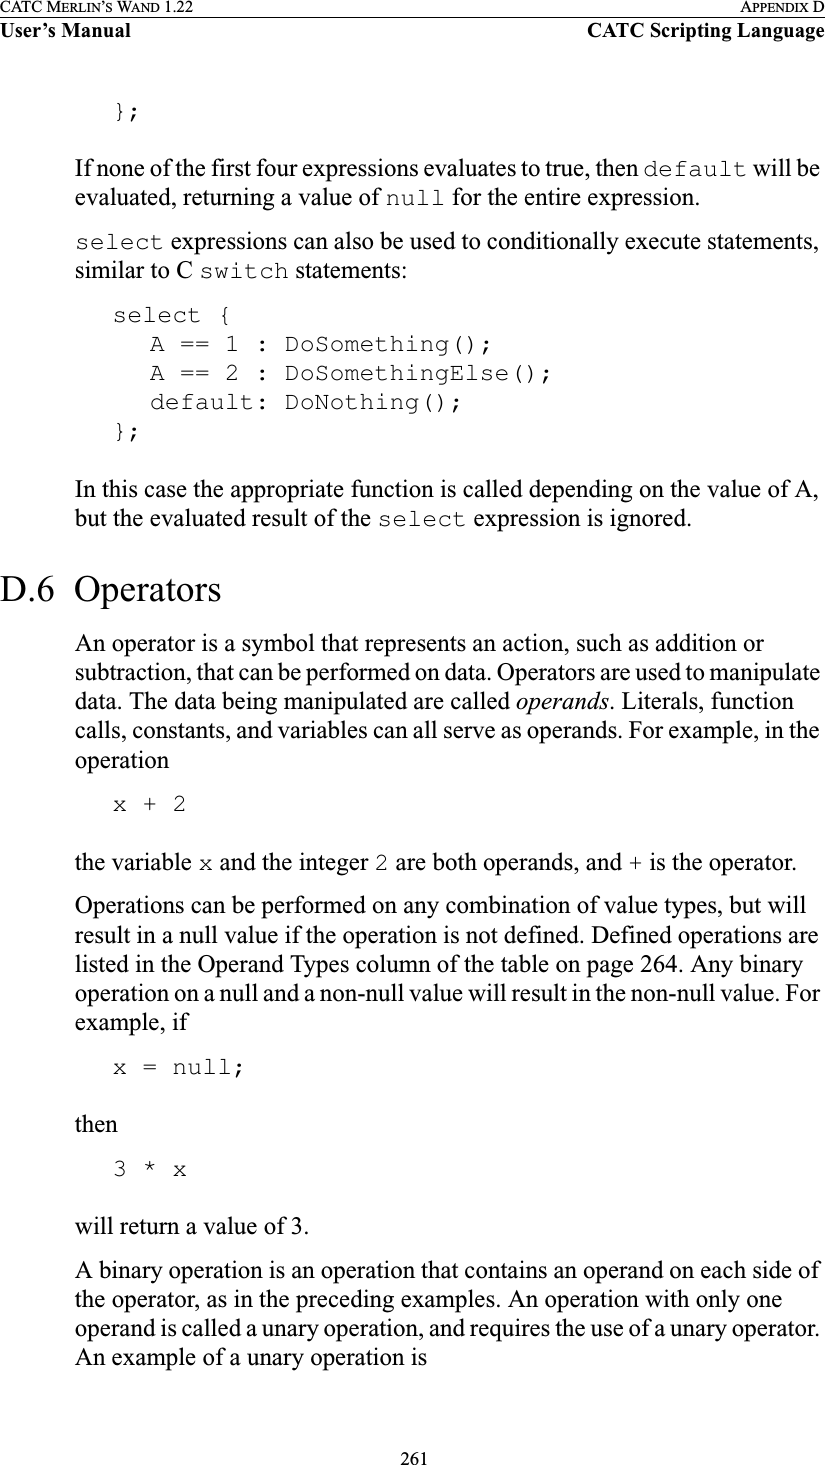  261CATC MERLIN’S WAND 1.22 APPENDIX DUser’s Manual CATC Scripting Language};If none of the first four expressions evaluates to true, then default will be evaluated, returning a value of null for the entire expression.select expressions can also be used to conditionally execute statements, similar to C switch statements:select {A == 1 : DoSomething();A == 2 : DoSomethingElse();default: DoNothing();};In this case the appropriate function is called depending on the value of A, but the evaluated result of the select expression is ignored. D.6  OperatorsAn operator is a symbol that represents an action, such as addition or subtraction, that can be performed on data. Operators are used to manipulate data. The data being manipulated are called operands. Literals, function calls, constants, and variables can all serve as operands. For example, in the operationx + 2the variable x and the integer 2 are both operands, and + is the operator.Operations can be performed on any combination of value types, but will result in a null value if the operation is not defined. Defined operations are listed in the Operand Types column of the table on page 264. Any binary operation on a null and a non-null value will result in the non-null value. For example, ifx = null;then3 * xwill return a value of 3.A binary operation is an operation that contains an operand on each side of the operator, as in the preceding examples. An operation with only one operand is called a unary operation, and requires the use of a unary operator. An example of a unary operation is